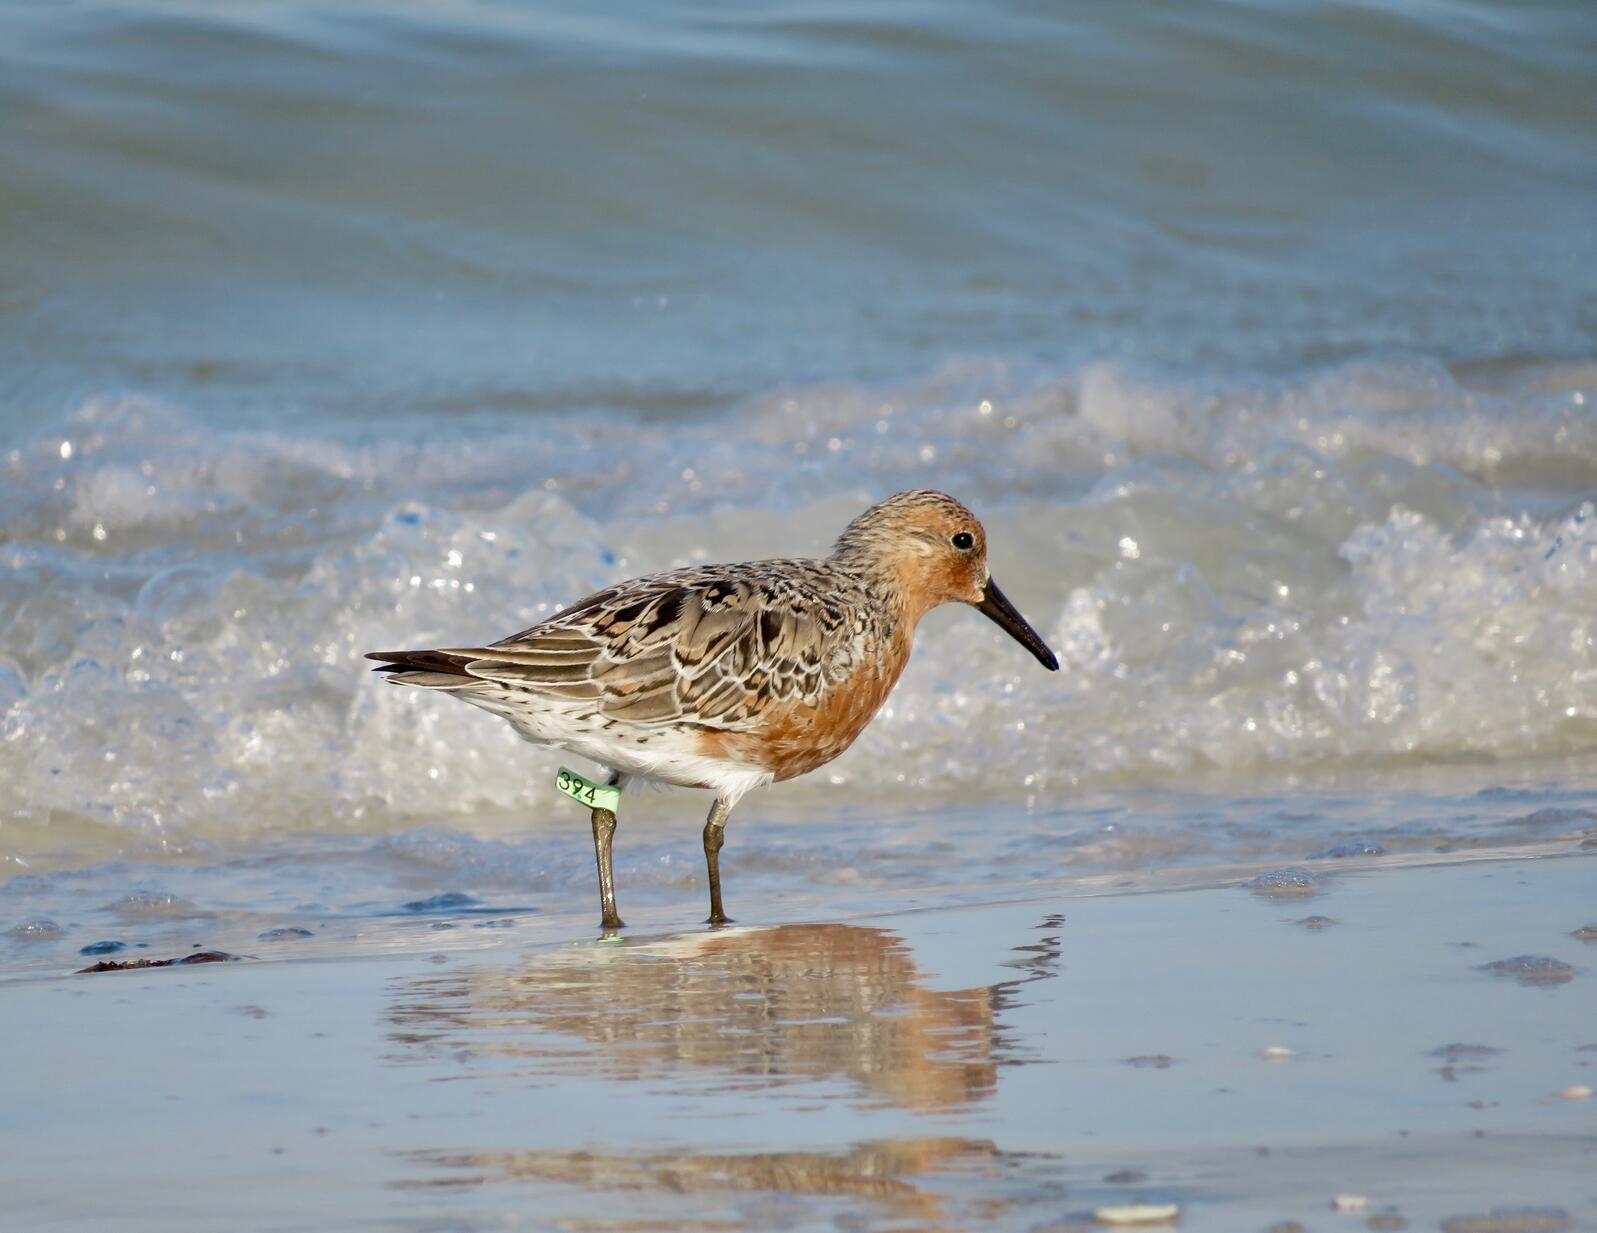 A Red Knot shorebird with a band on its leg, standing in the waves